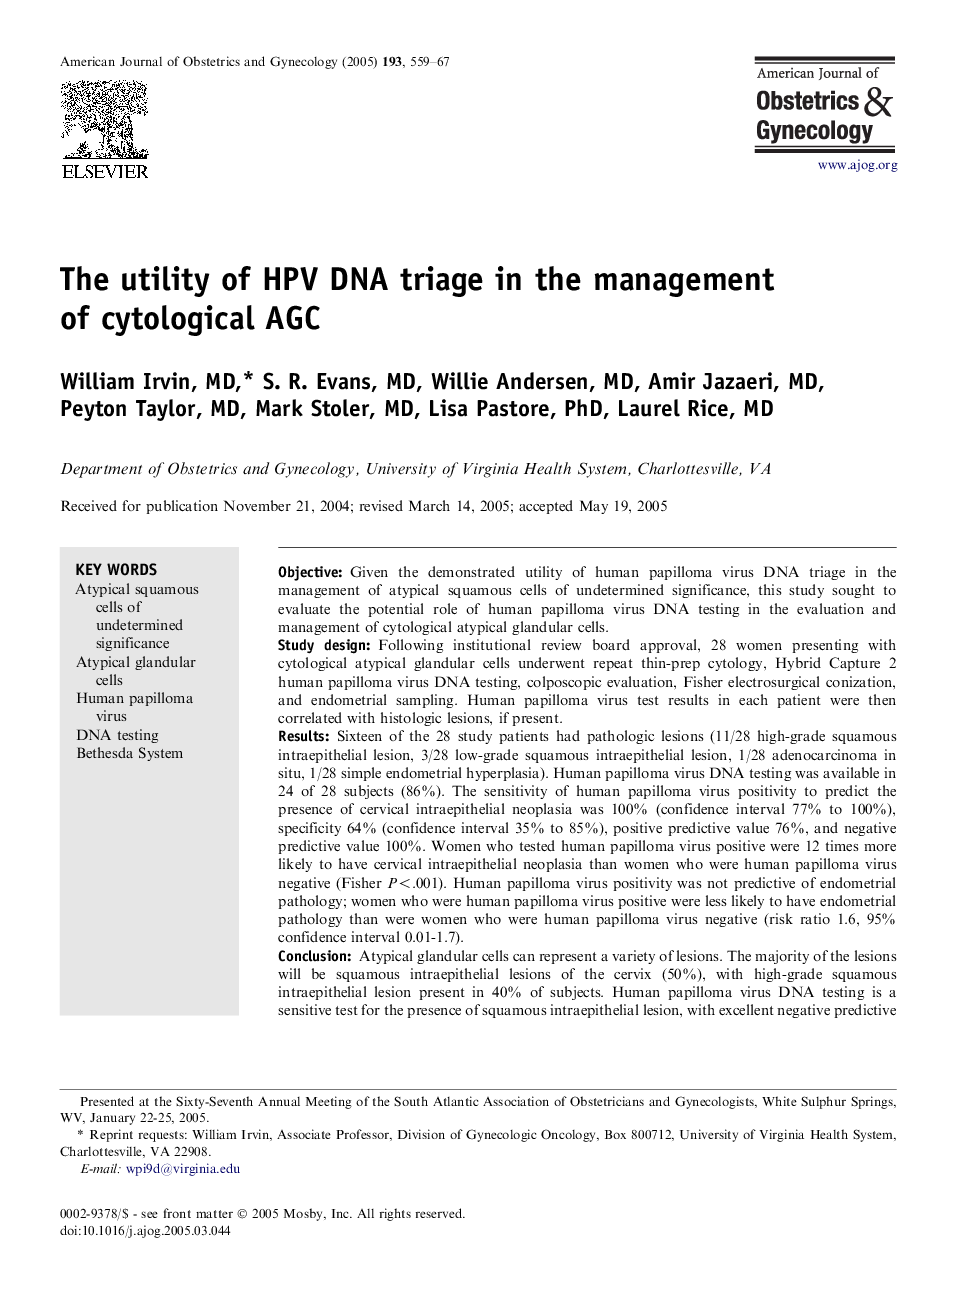 The utility of HPV DNA triage in the management of cytological AGC